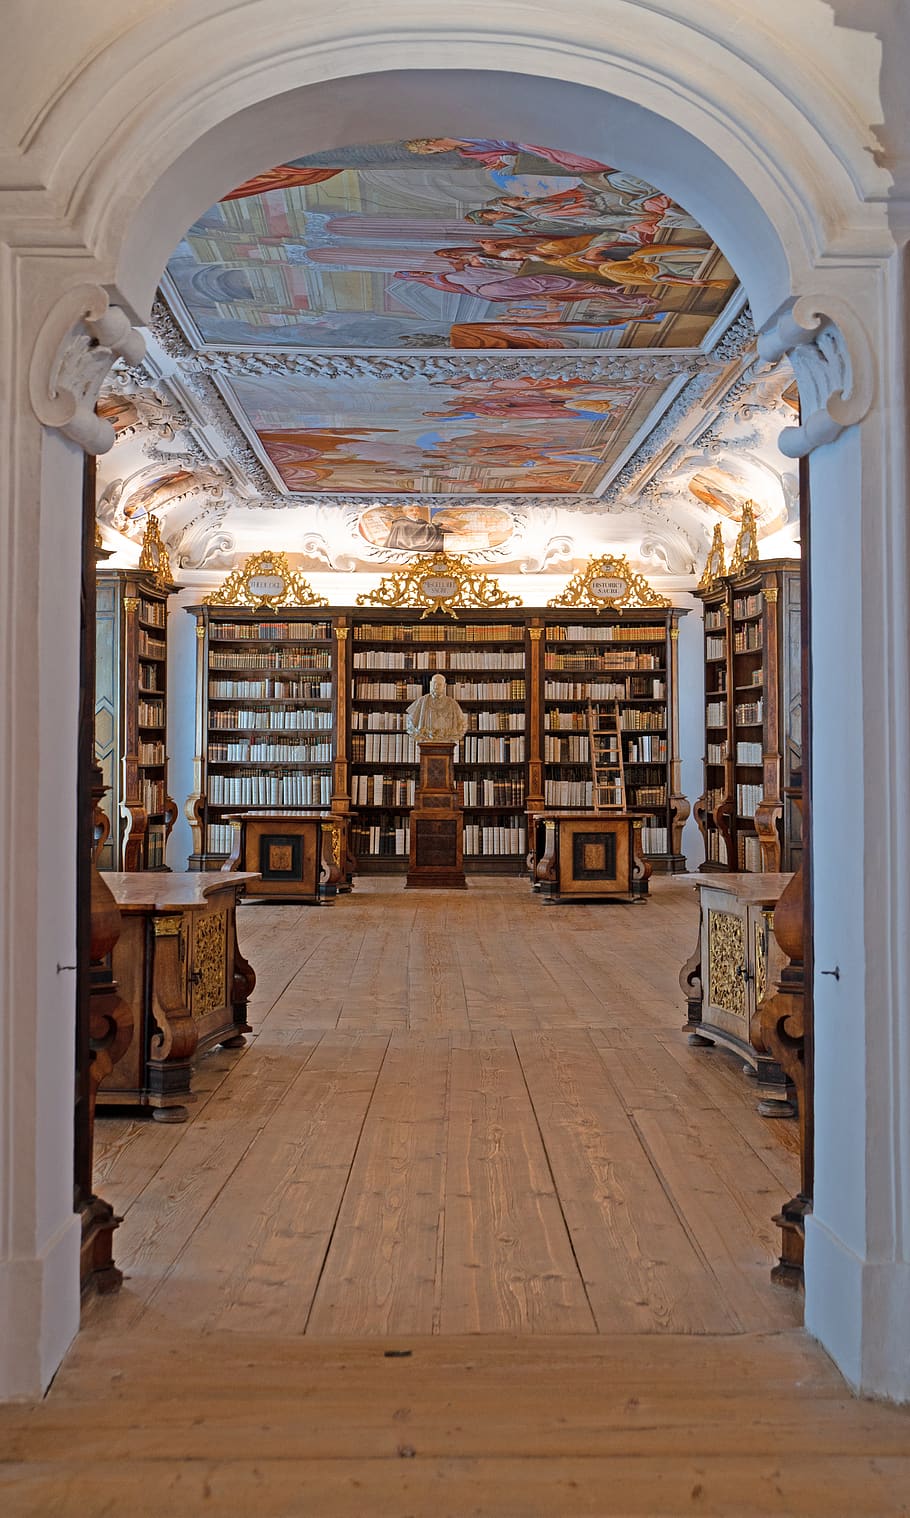 books, statue, old, library, ceiling frescos, abbey library, architecture, indoors, flooring, building